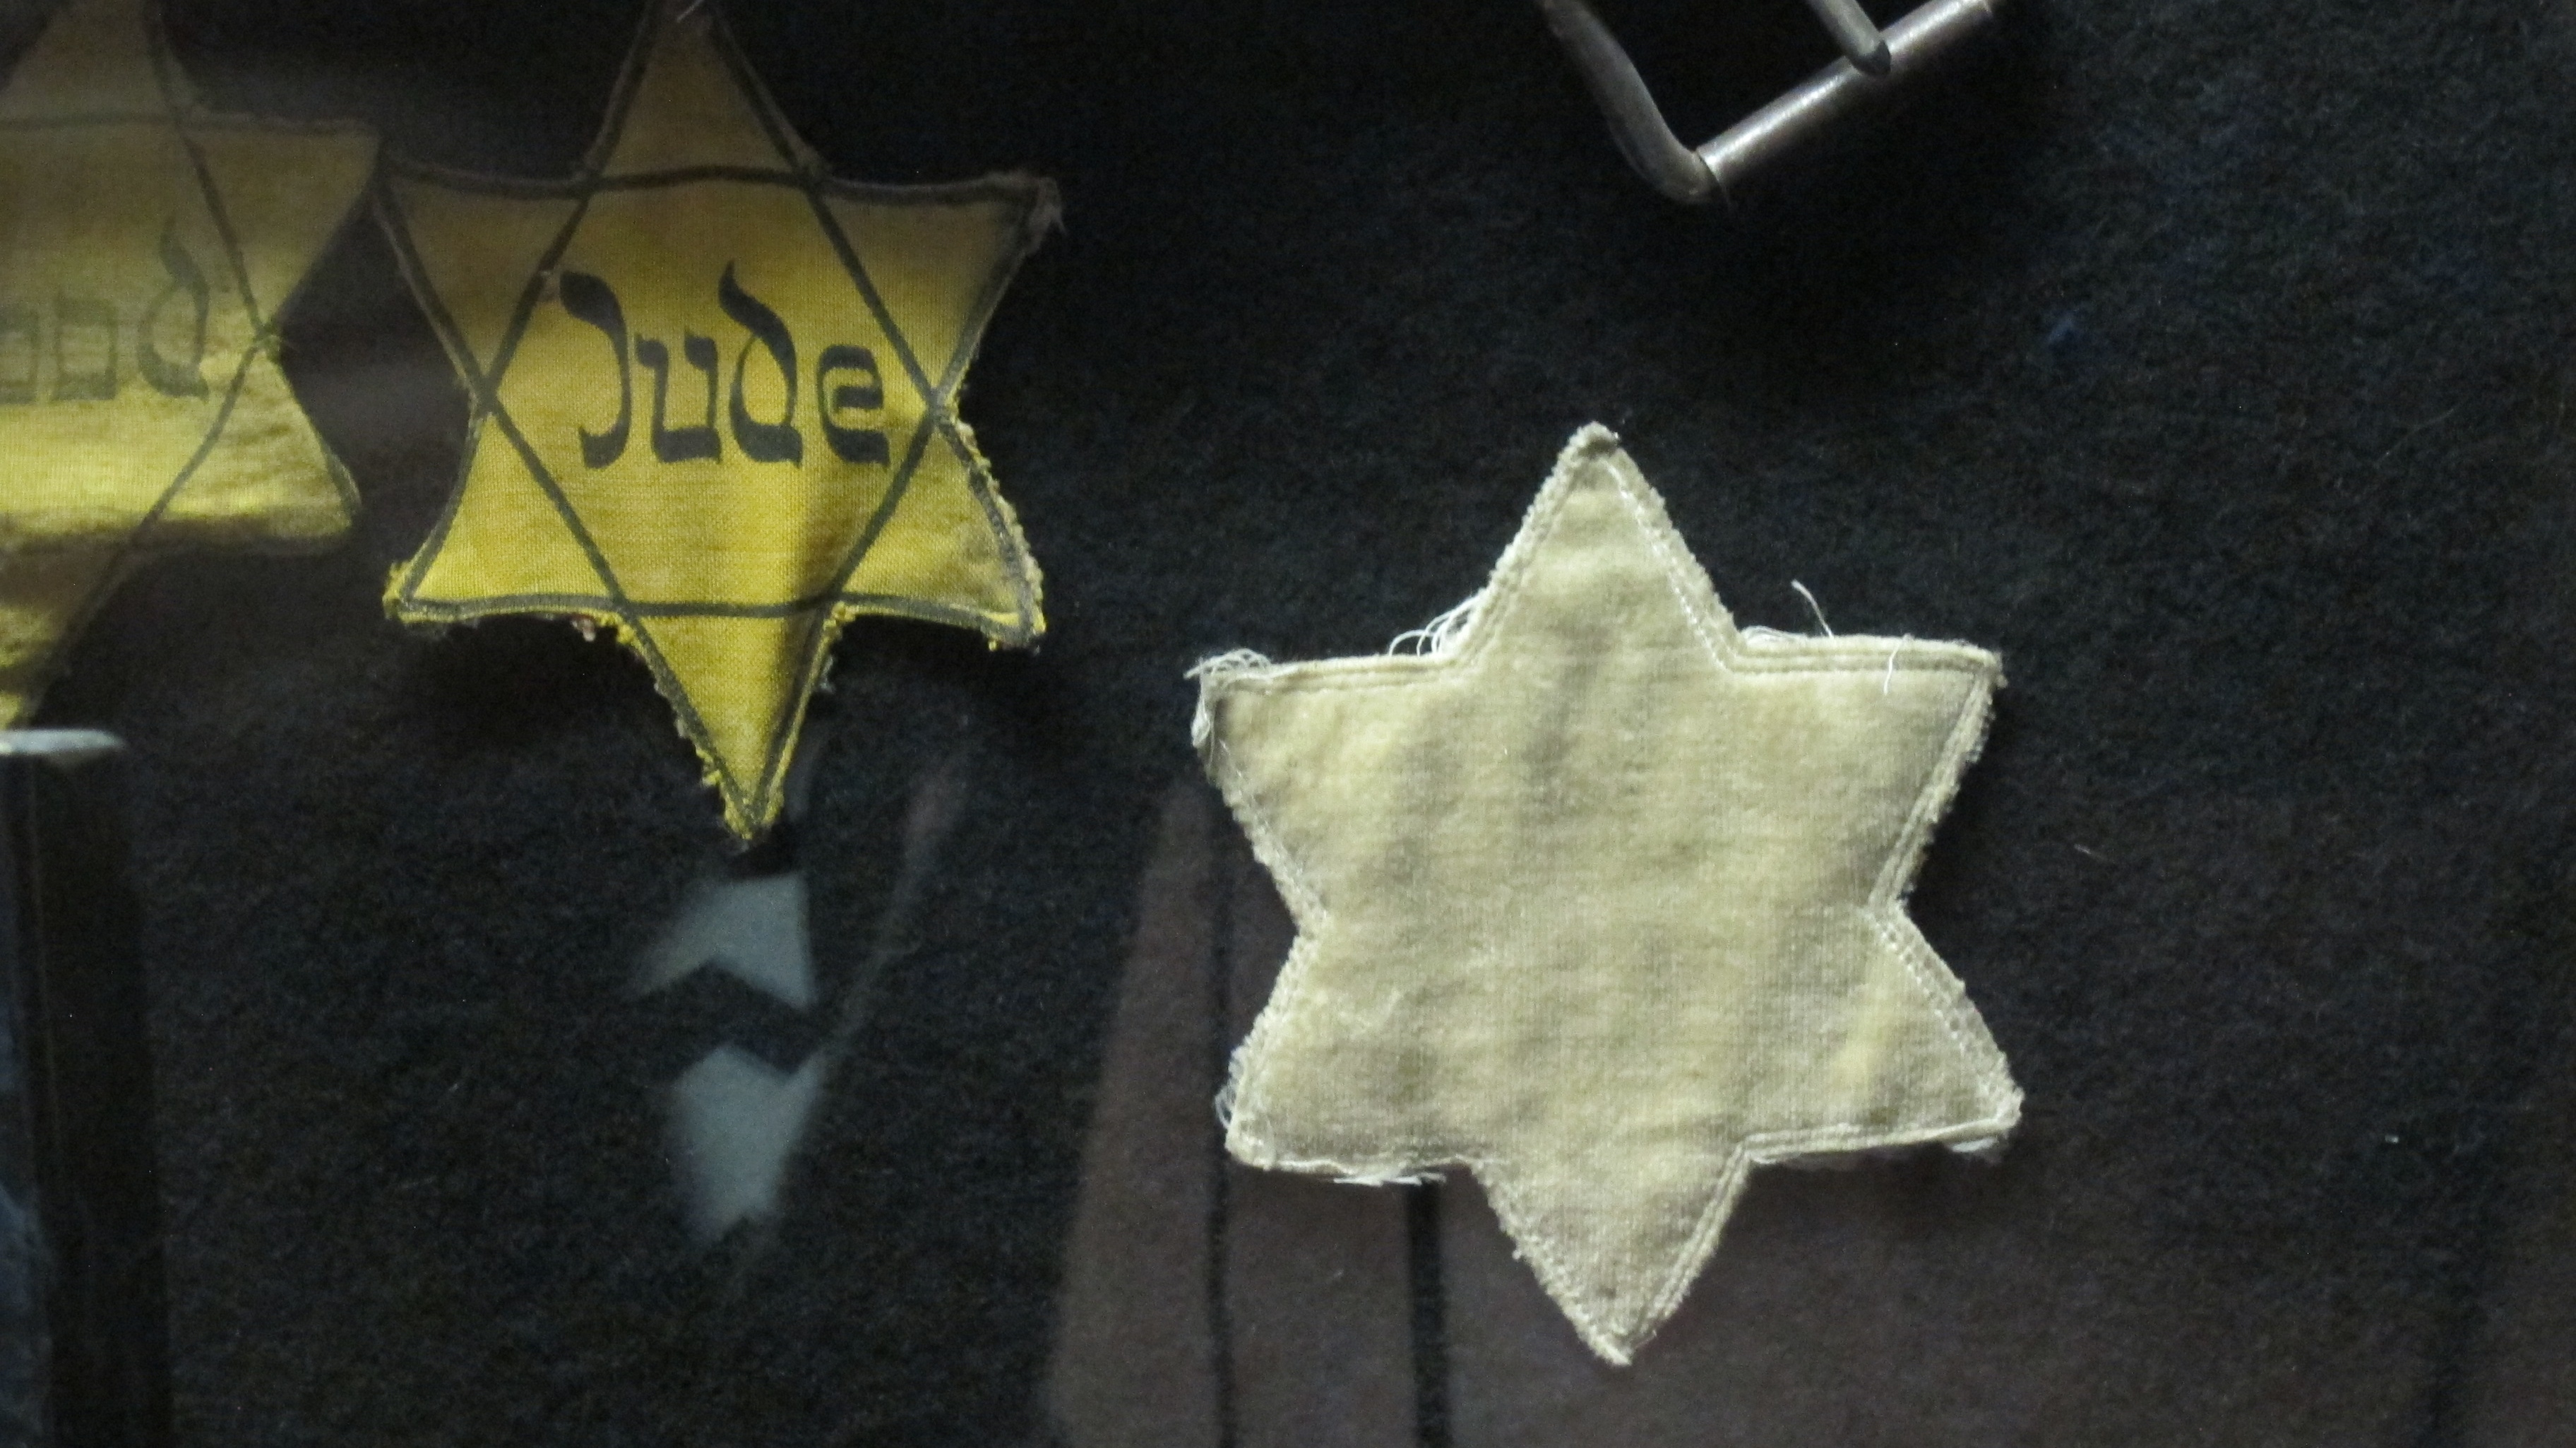 Auschwitz. Star of David patches were sewn on to the clothing of Jews during Nazi domination of Eastern Europe. On display at the Dohany Stree Synagogue, Budapest. Photo by Barbara Newhall